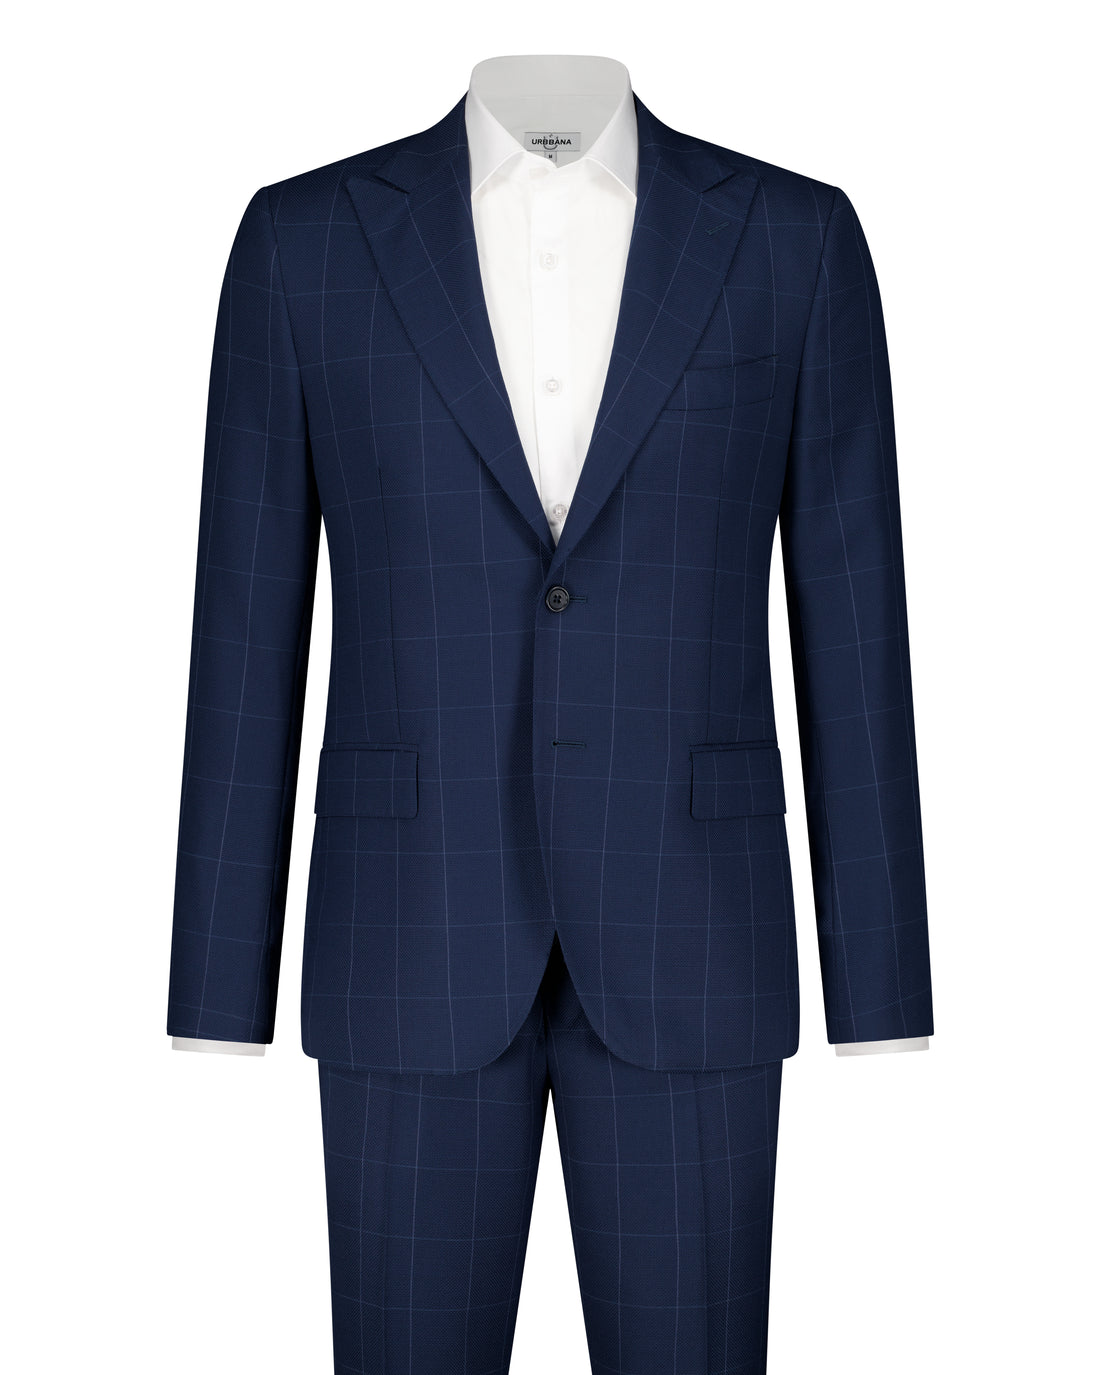 Emilio Zegna Cloth Suit - Navy - Made in Italy